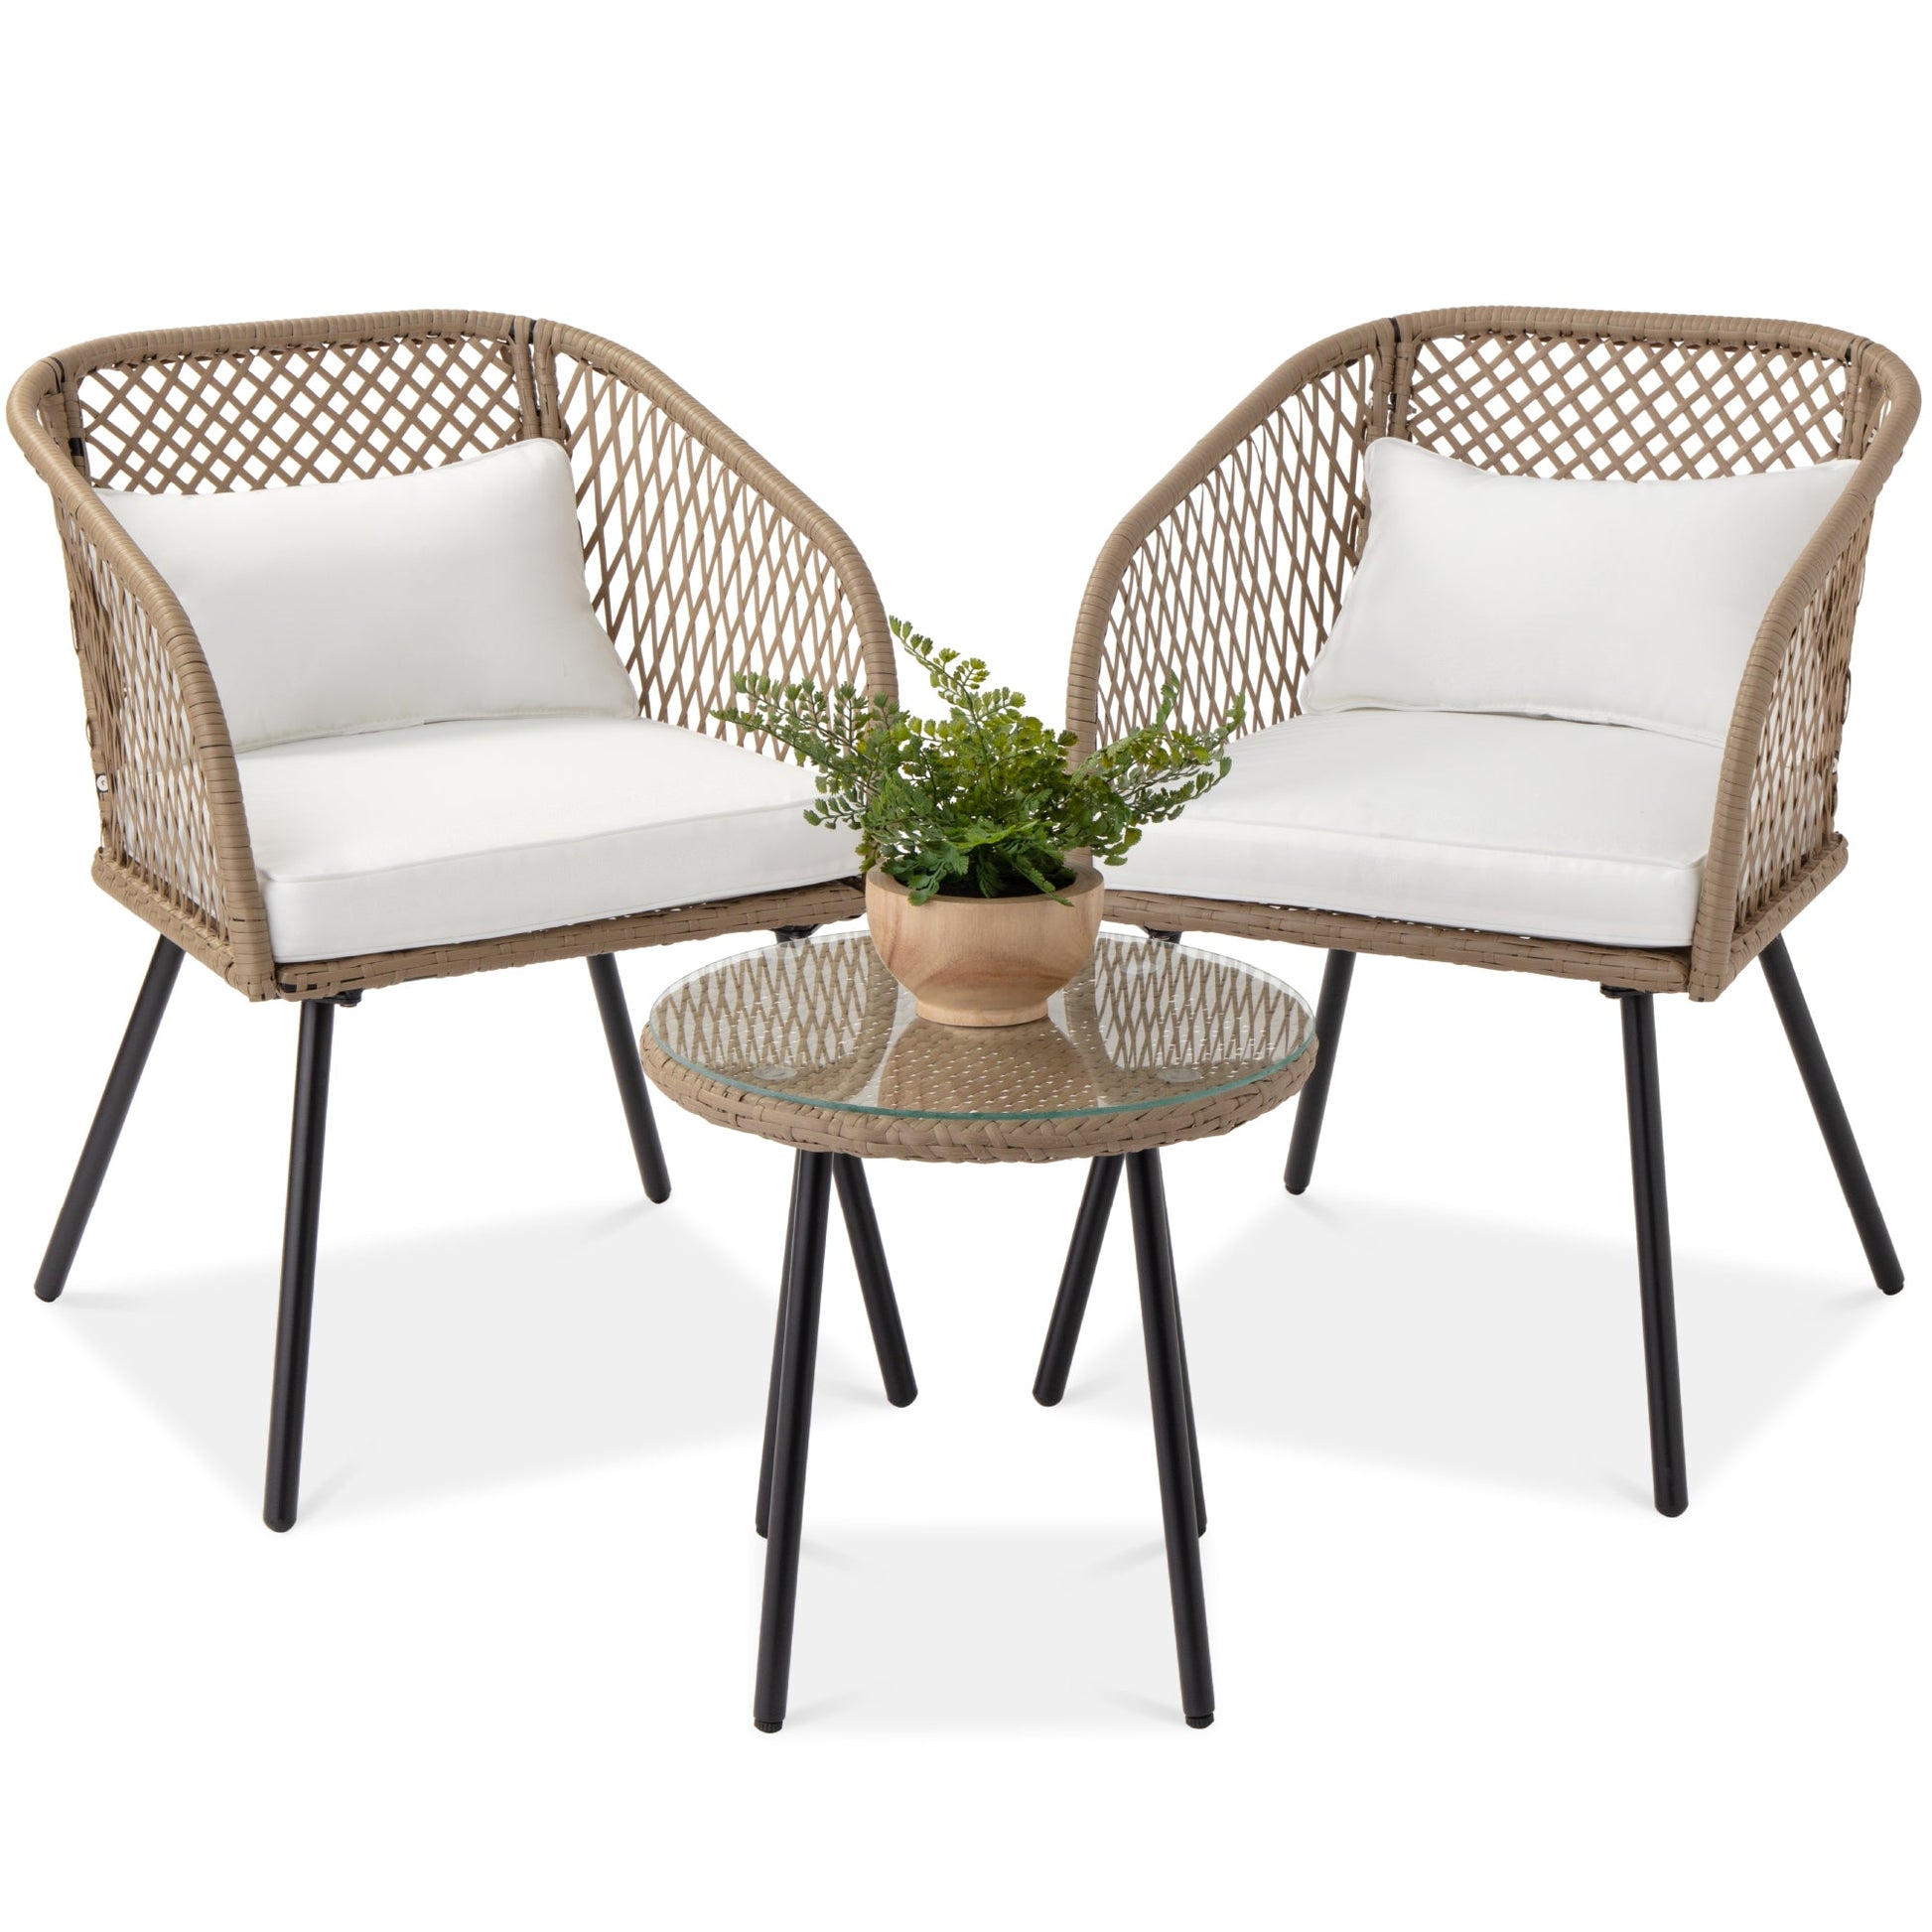 3-Piece Outdoor Diamond Weave Wicker Bistro Set w/ Tempered Glass Side Table